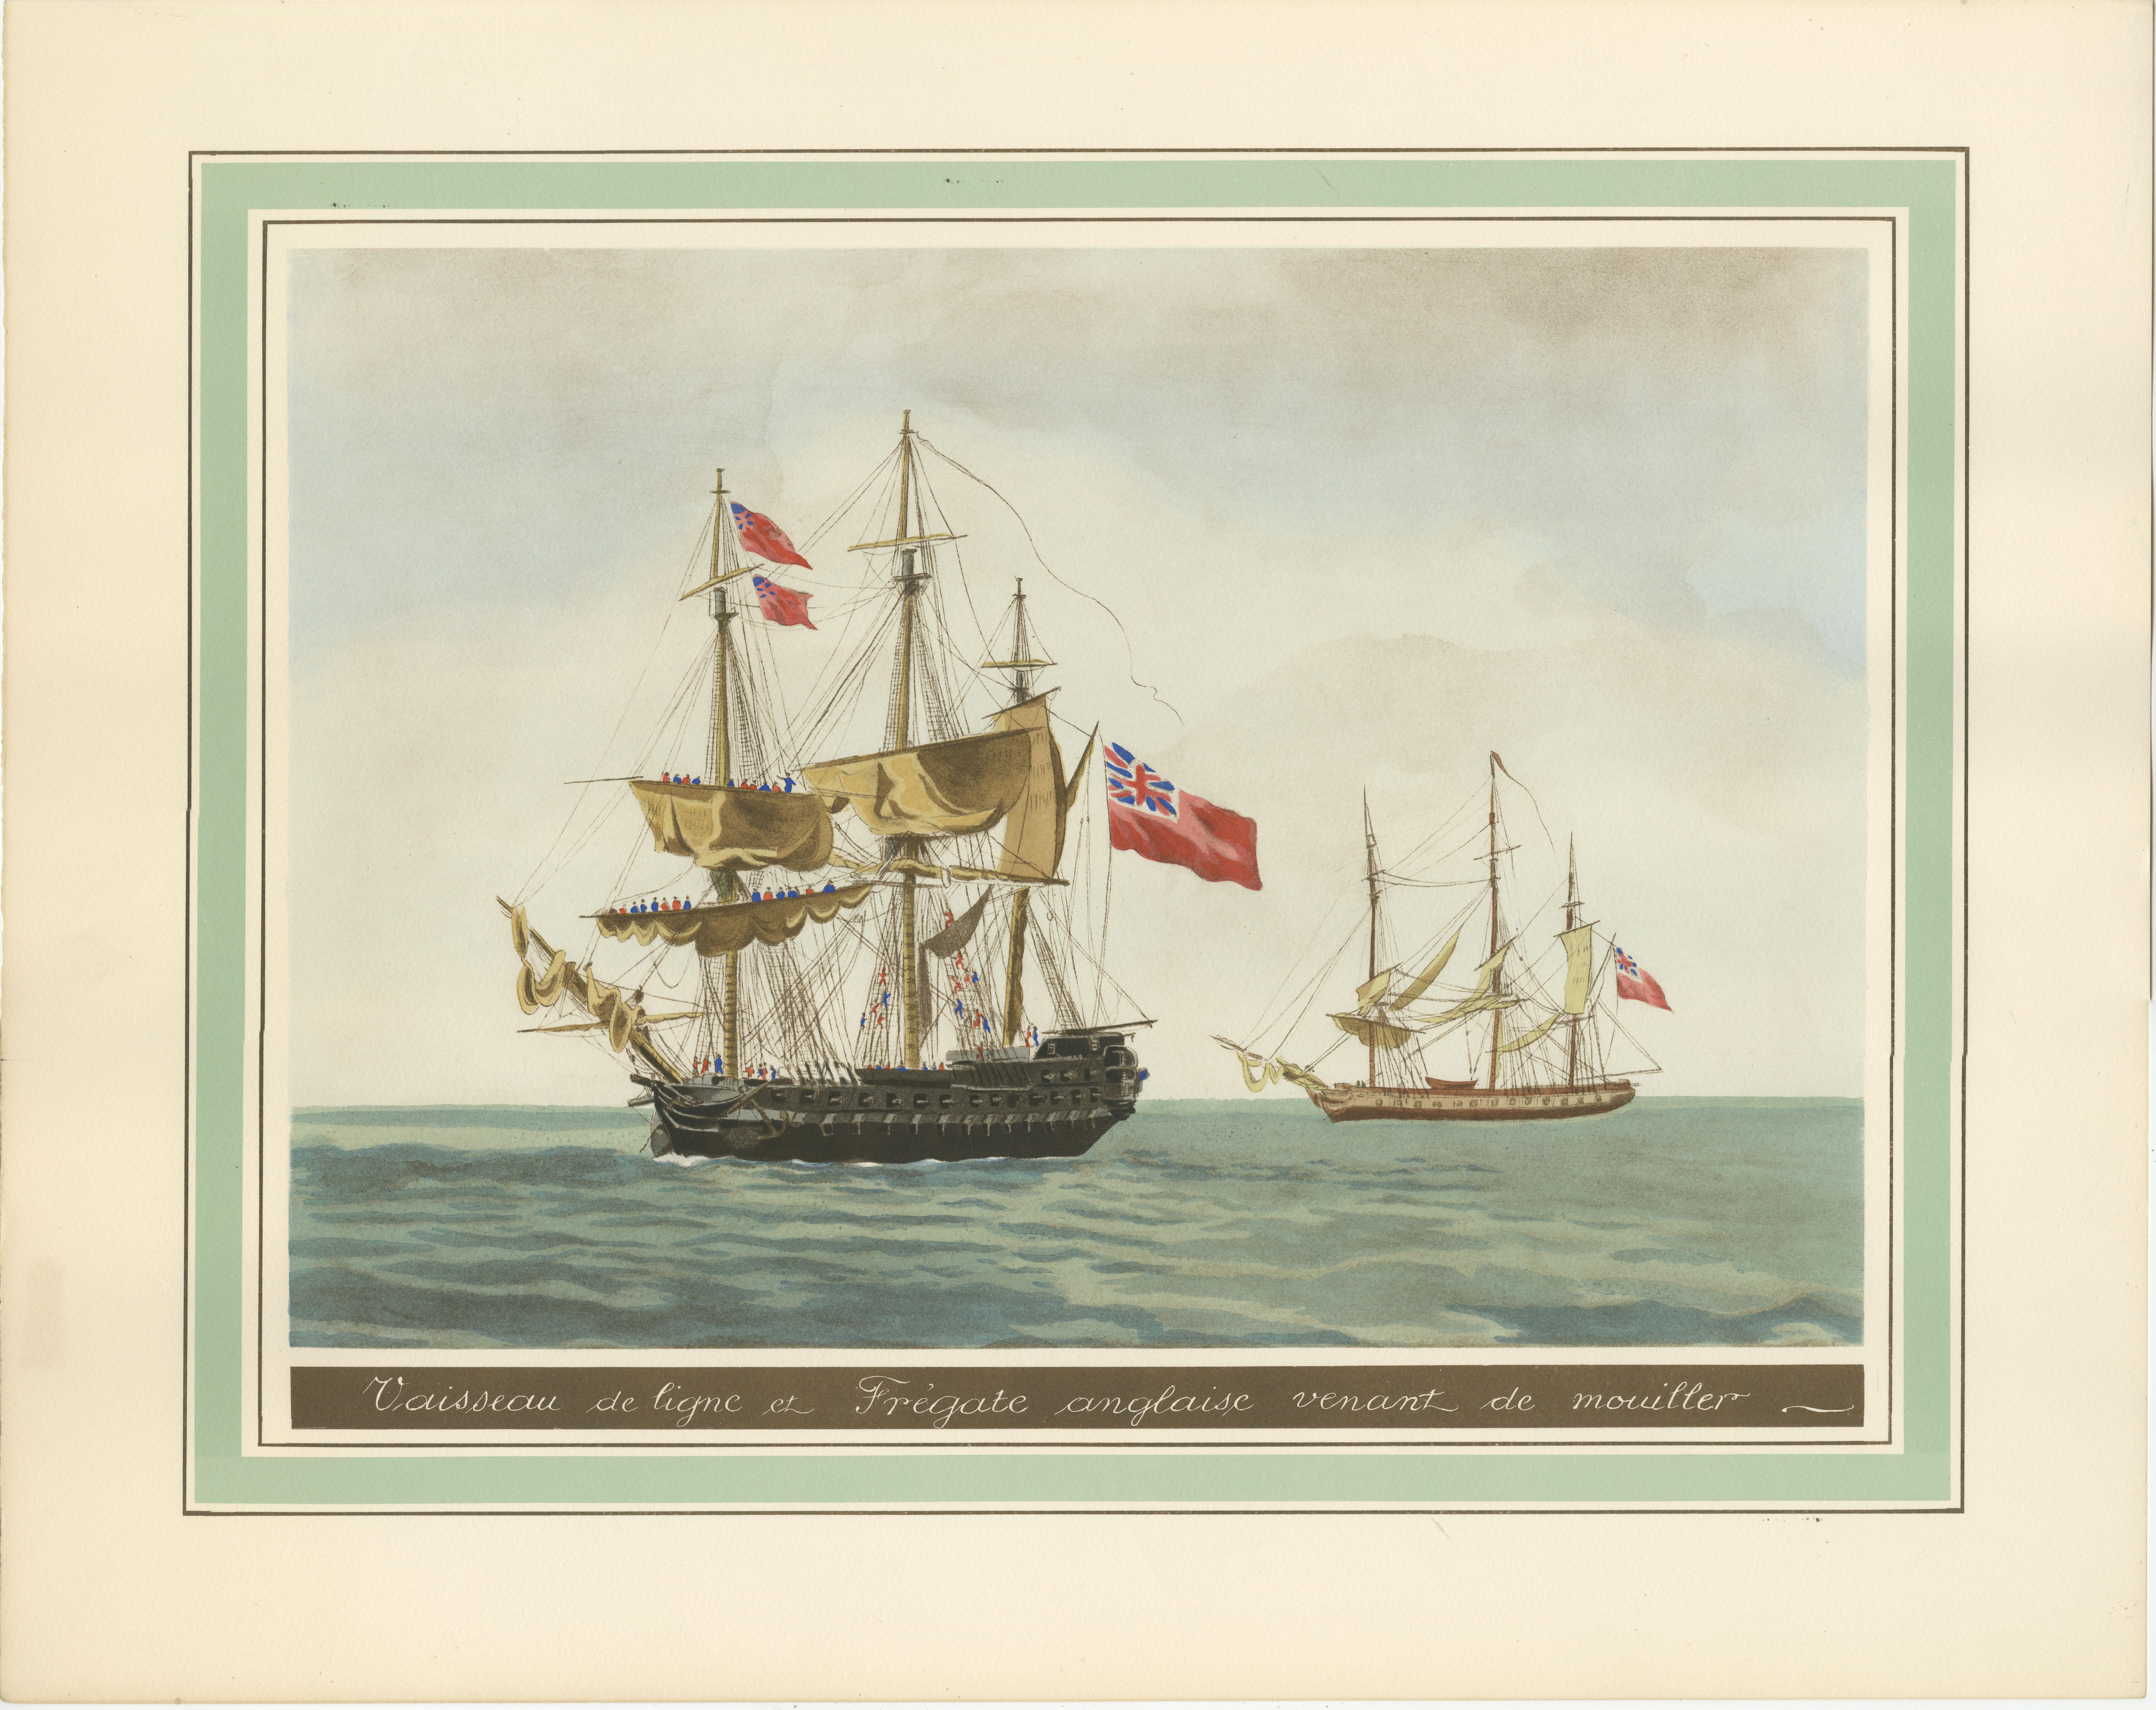 The image on this original antique print depicts two naval vessels, with the foremost being a larger ship of the line adorned with an extensive array of sails and flags, including what appears to be the Union Jack of the United Kingdom. Behind it is